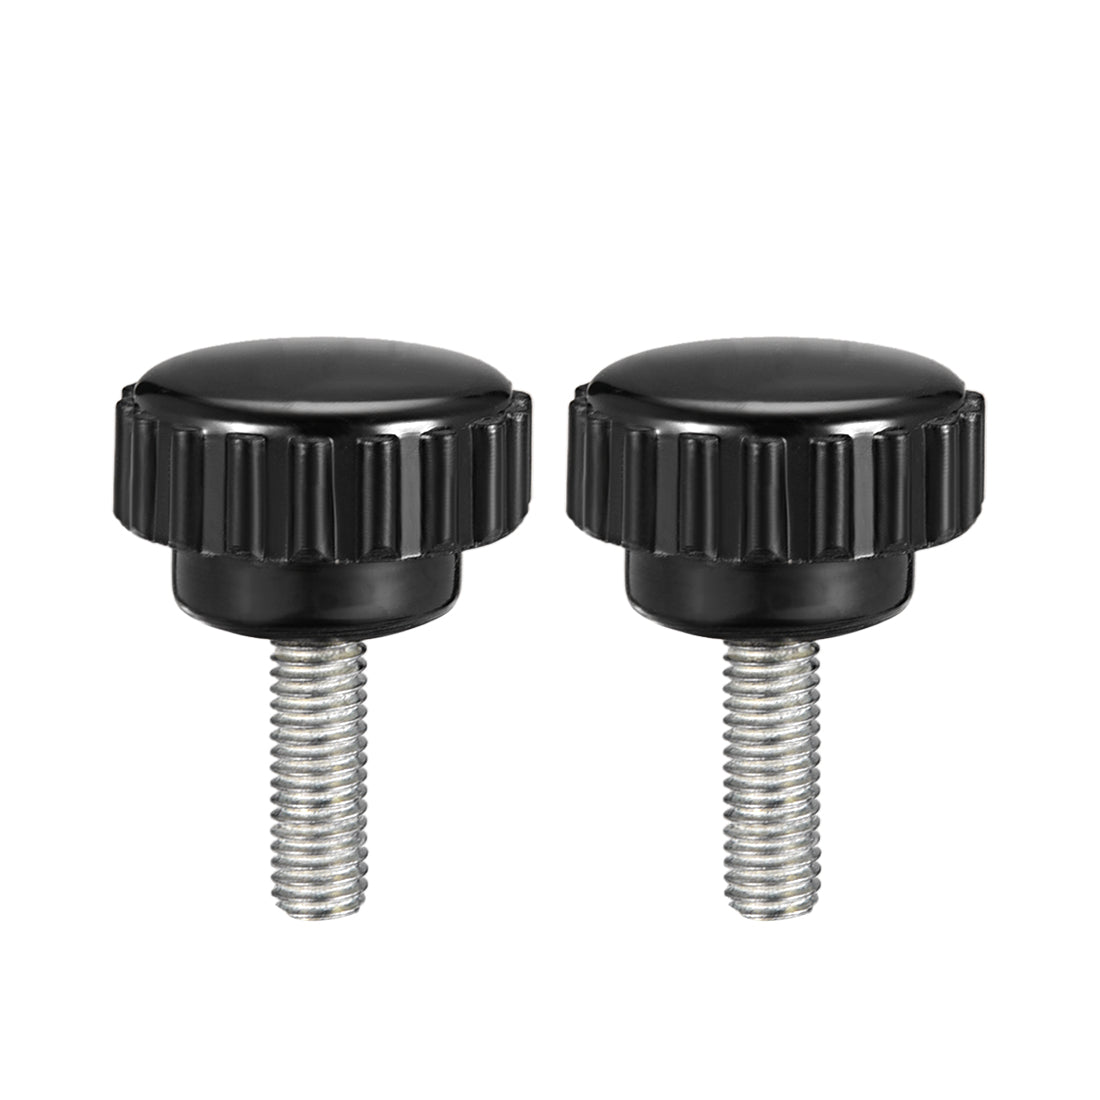 Uxcell Uxcell M5 x 15mm Male Thread Knurled Clamping Knobs Grip Thumb Screw on Type 2 Pcs